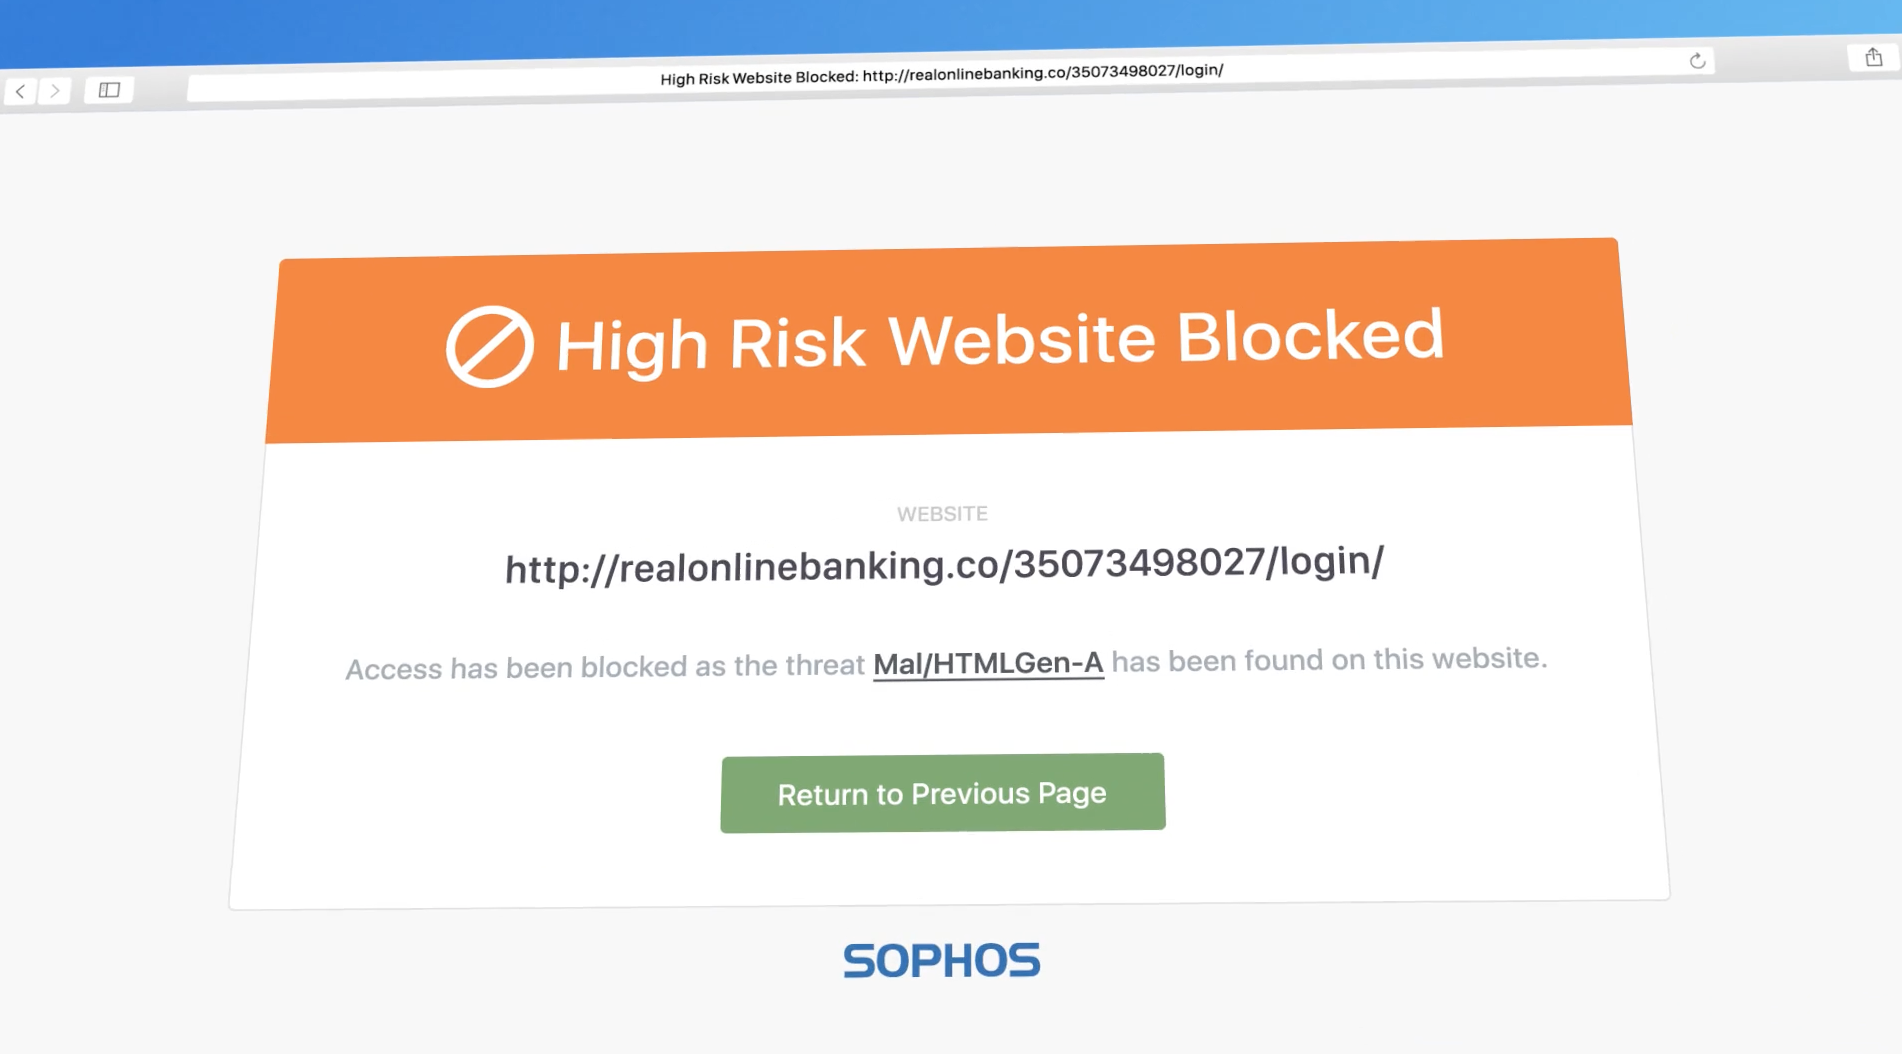 sophos for mac review